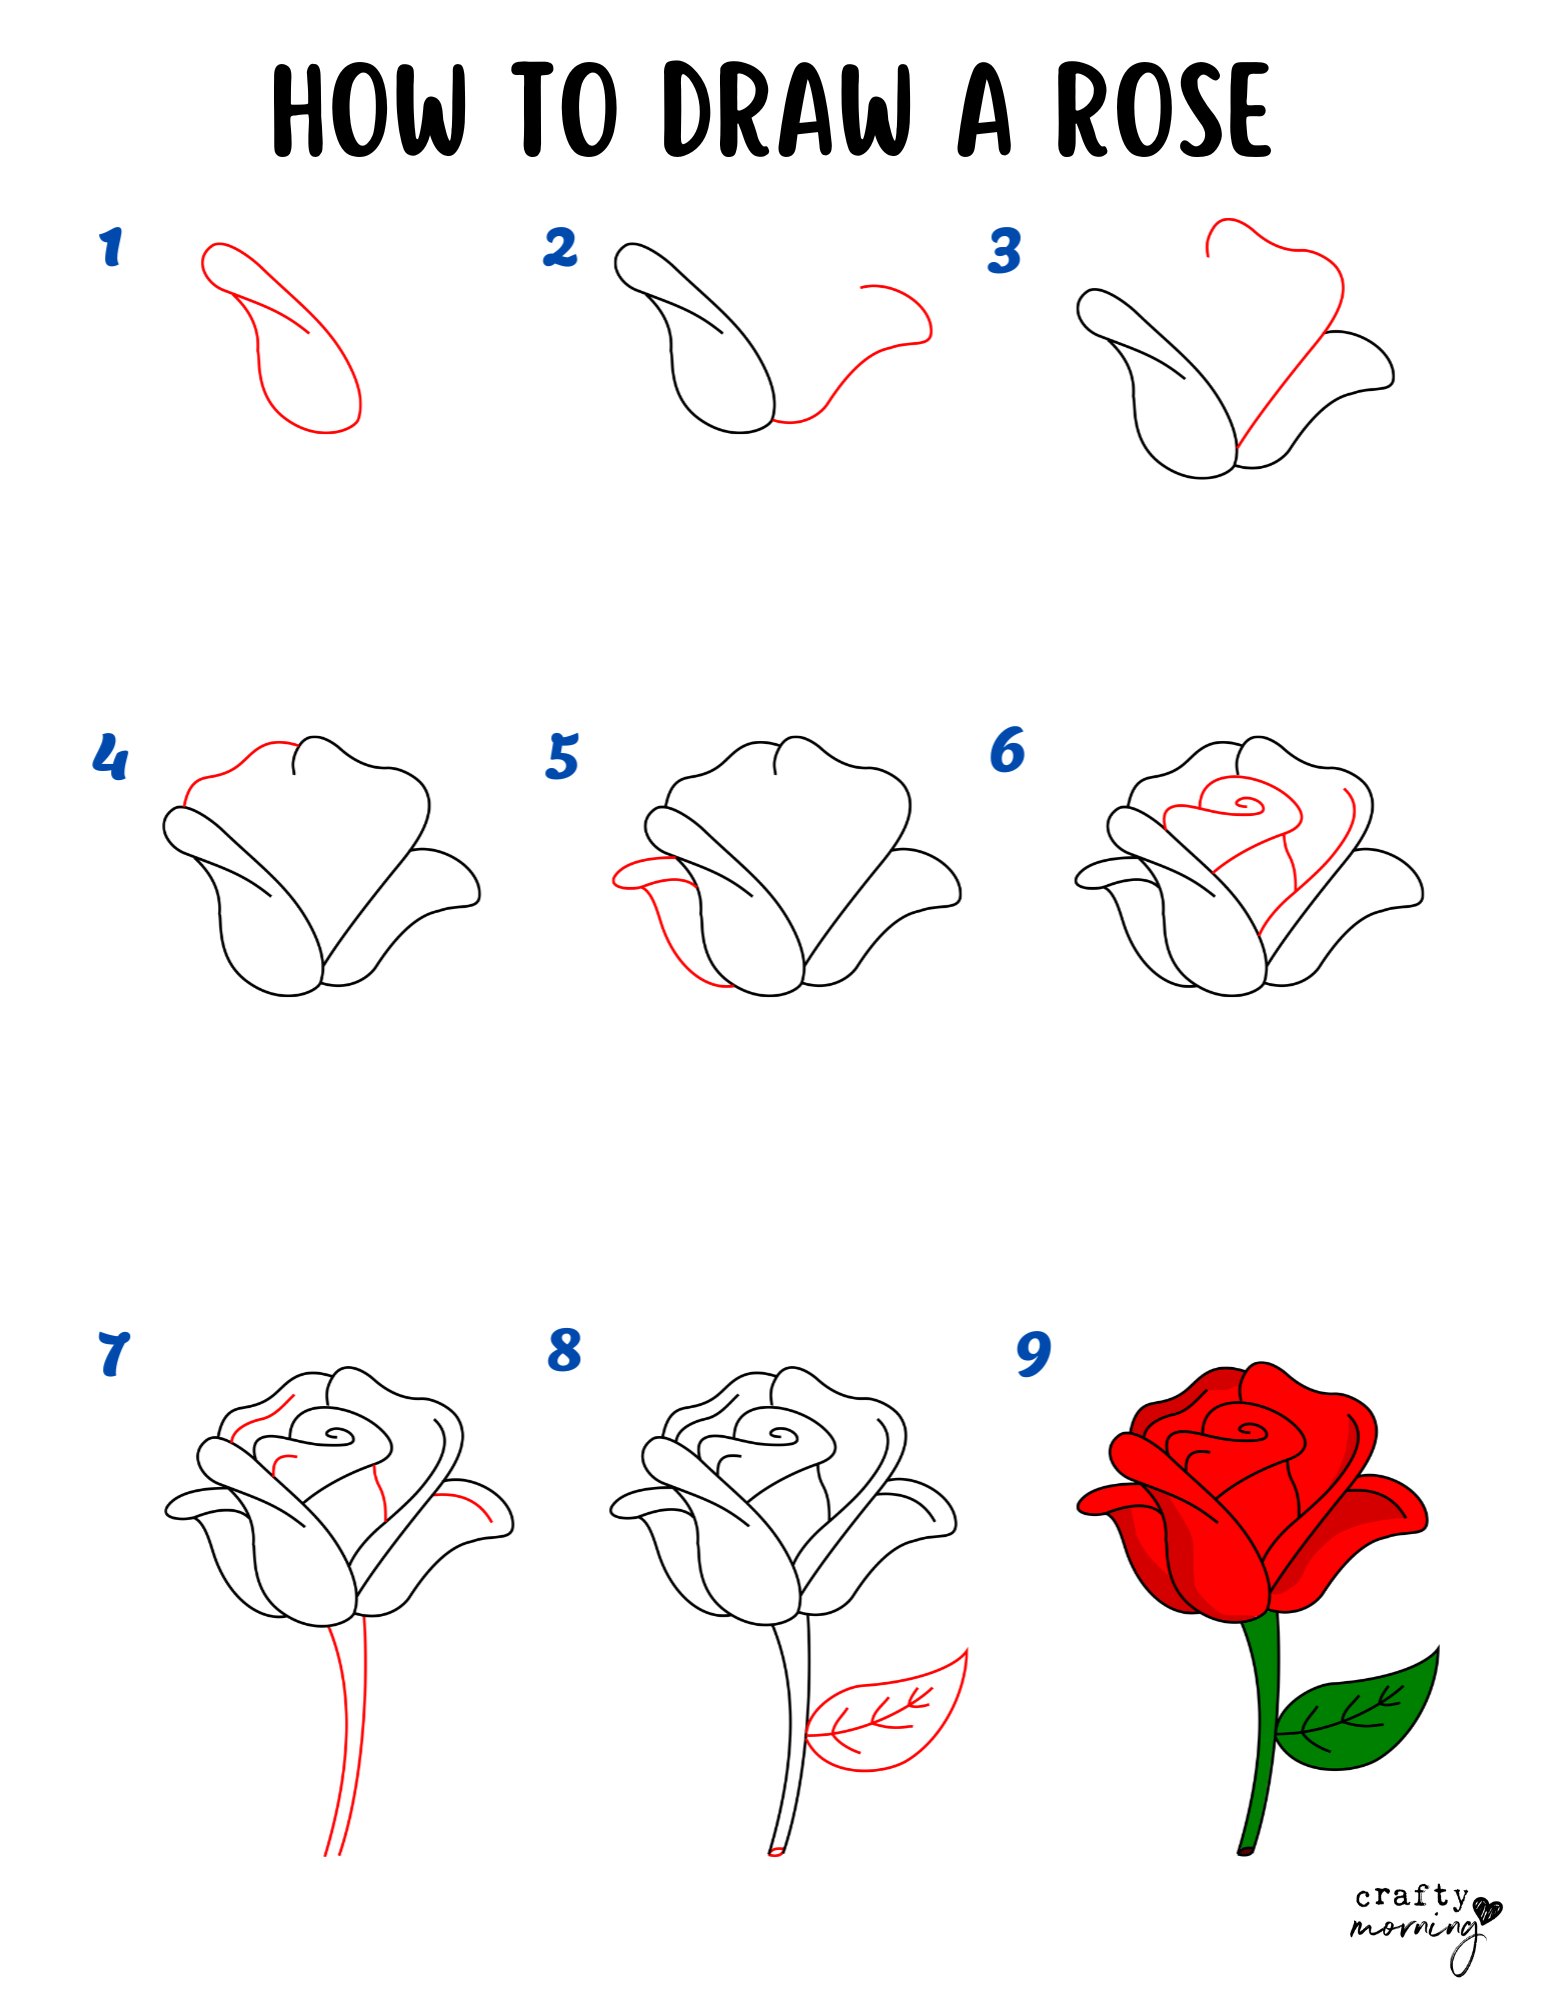 How to draw rose step by step: Realistic rose drawing easy with pencil